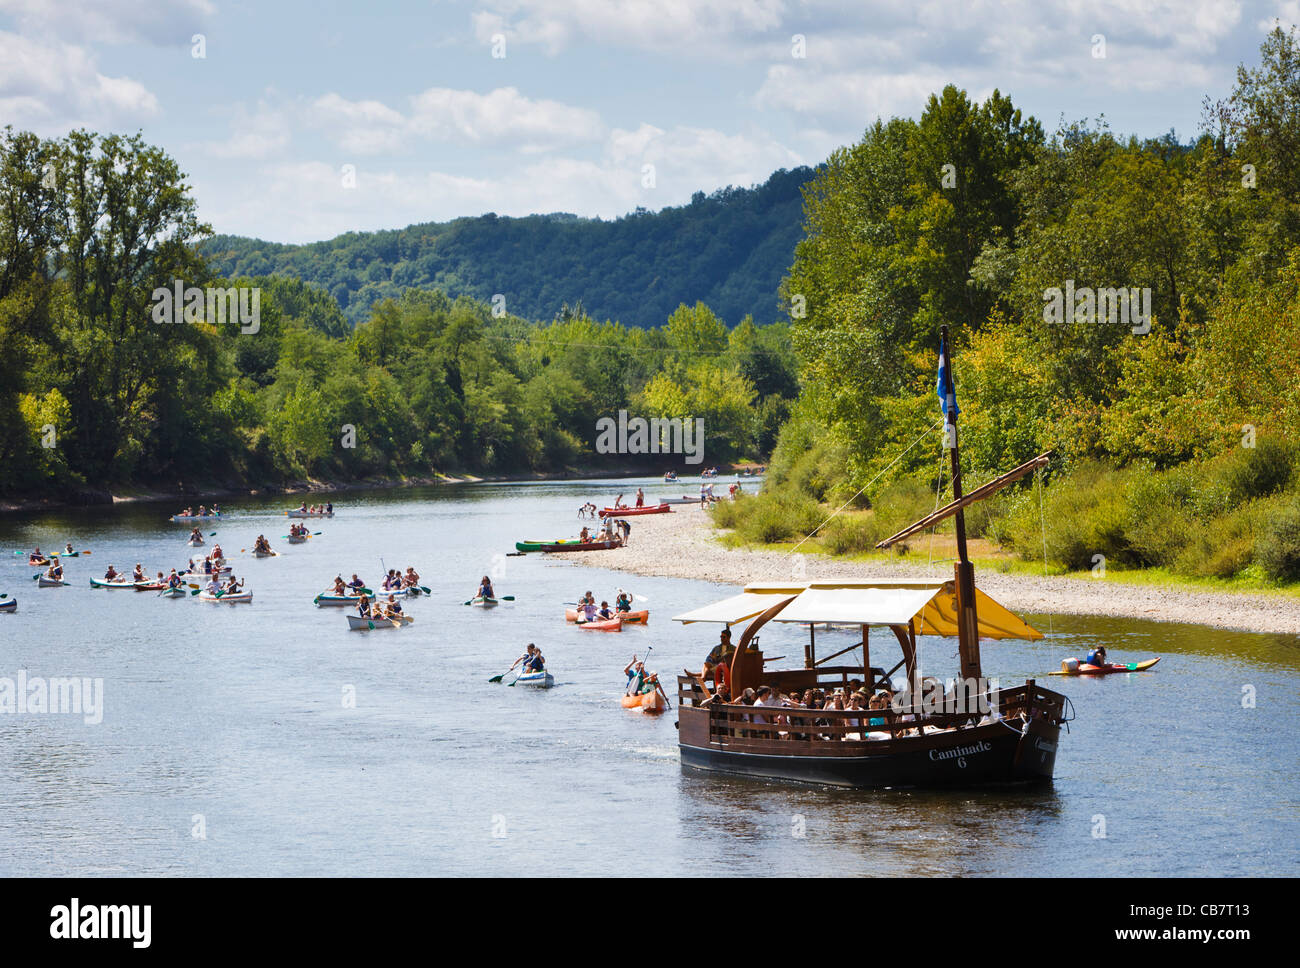 Dordogne river - Tourist boat and people canoeing on the Dordogne River, France, Europe Stock Photo